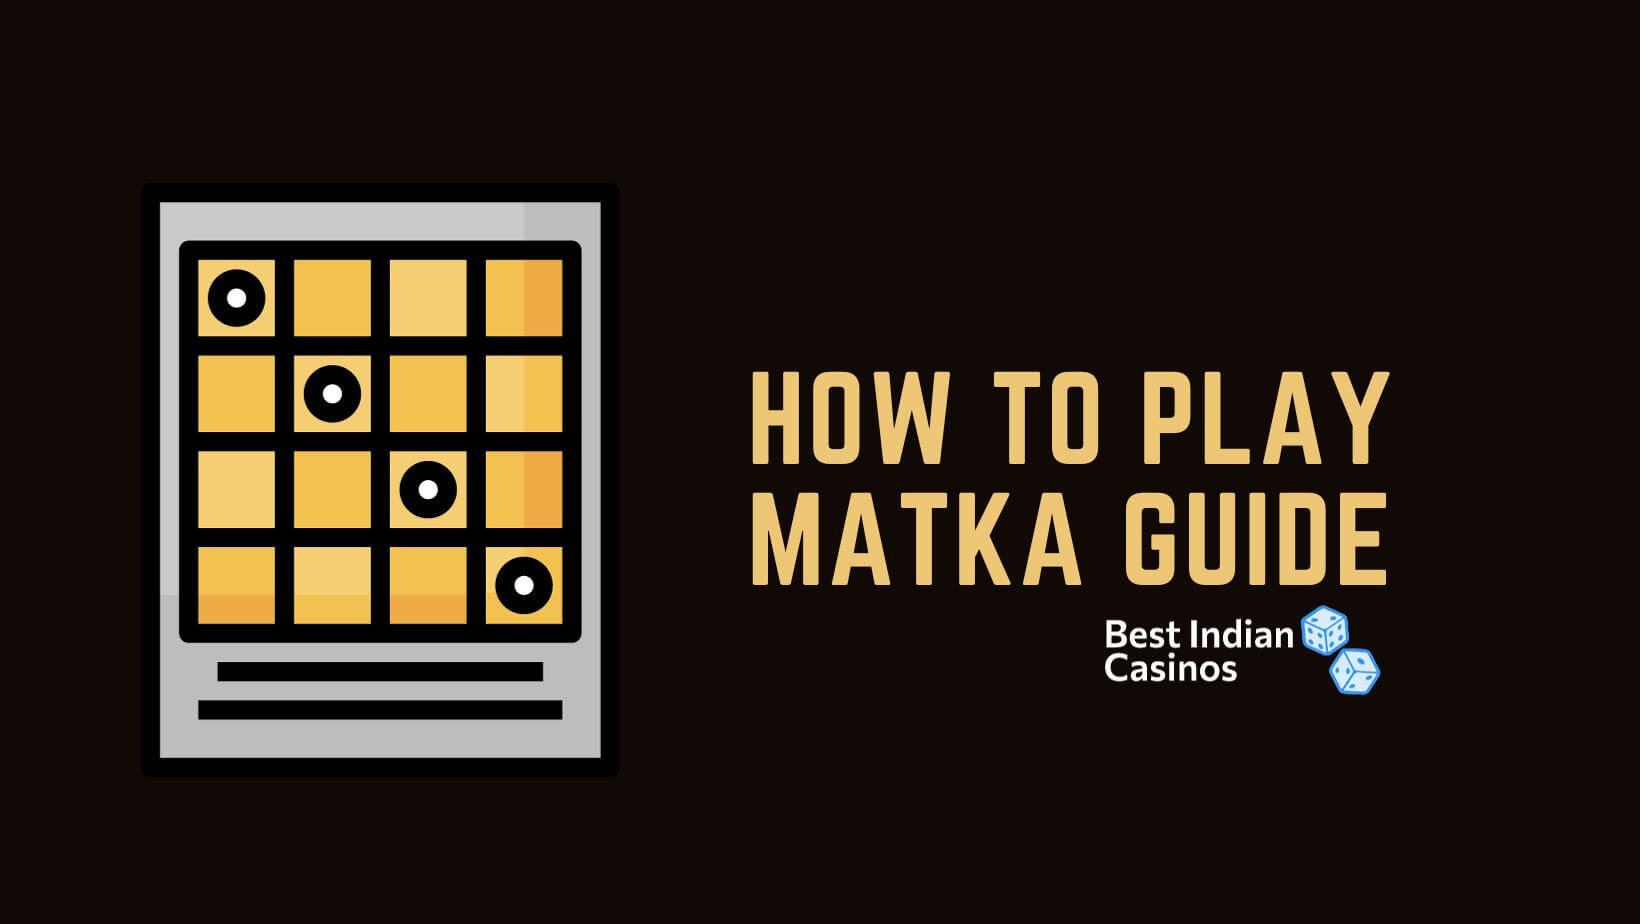 How to Play Matka Guide